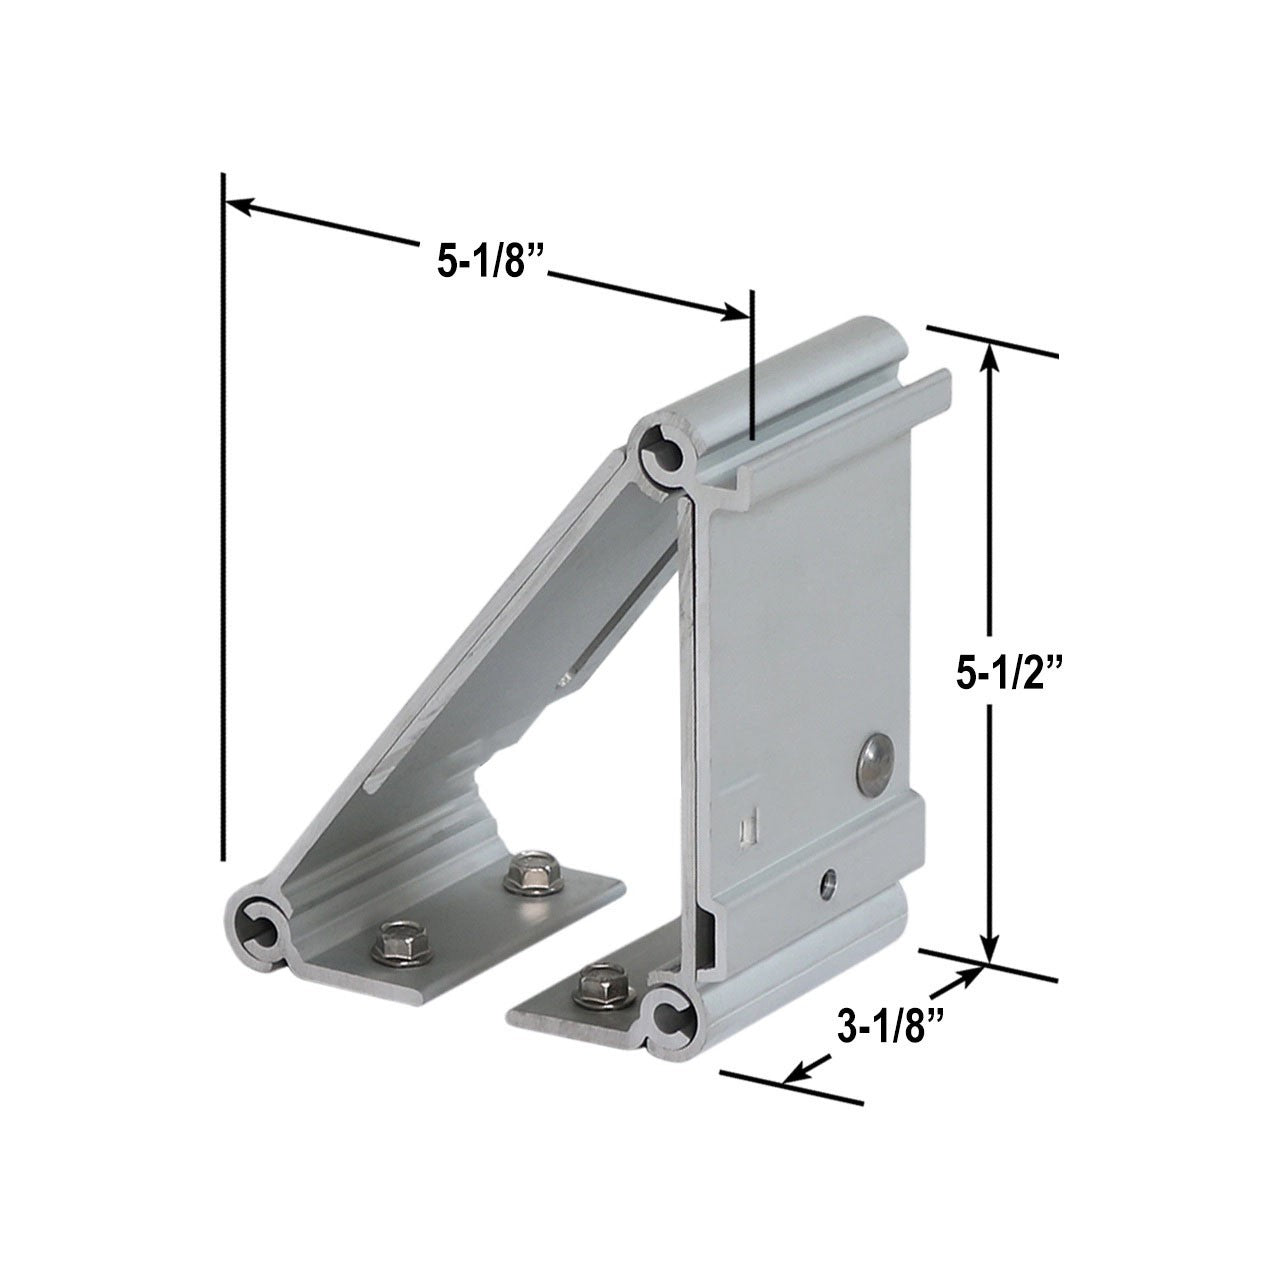 Fiamma Universal Mounting Bracket for F45S Awning | (98655-011)